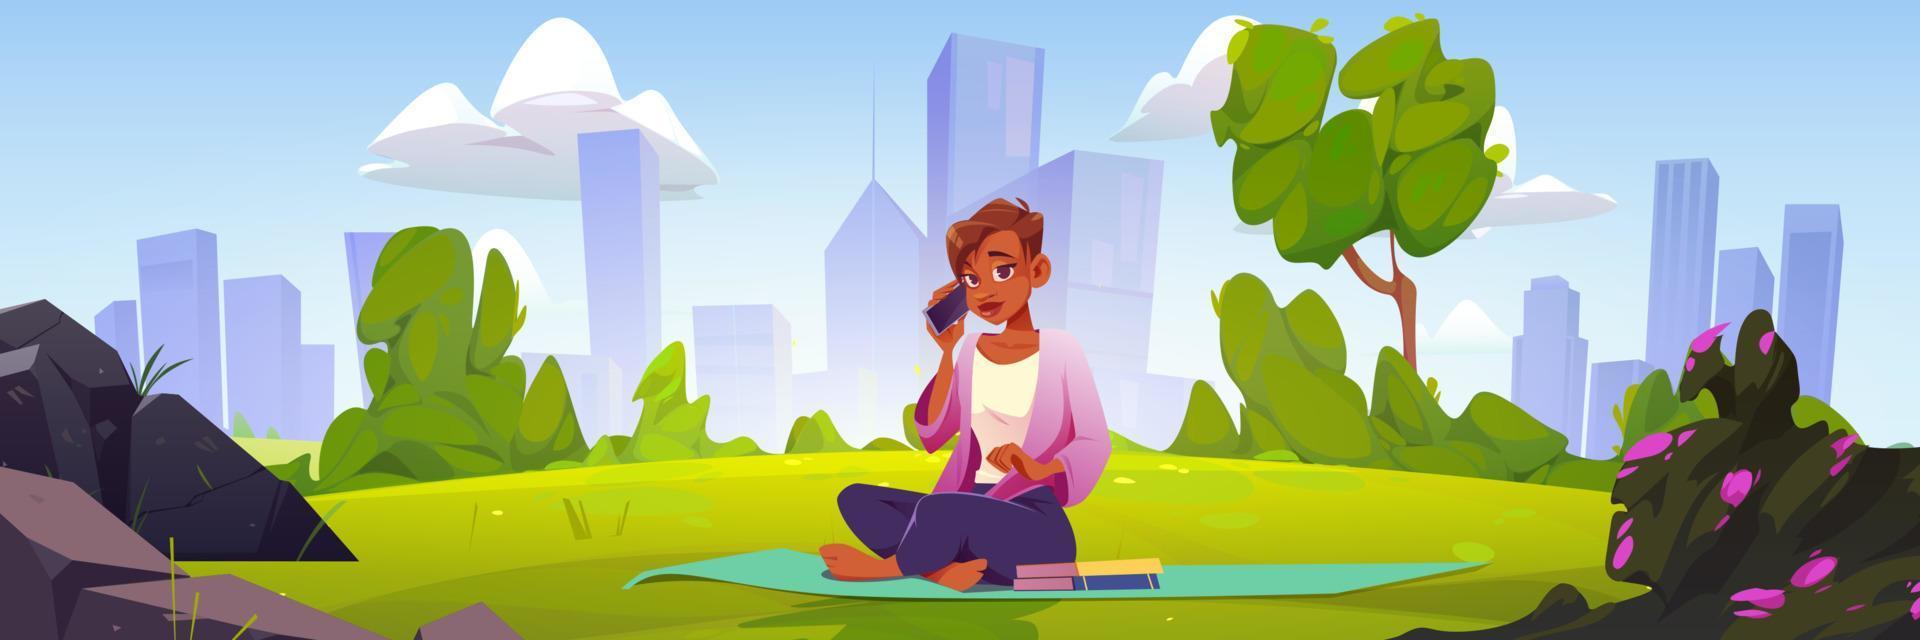 Woman with smartphone relax in city park, relax vector